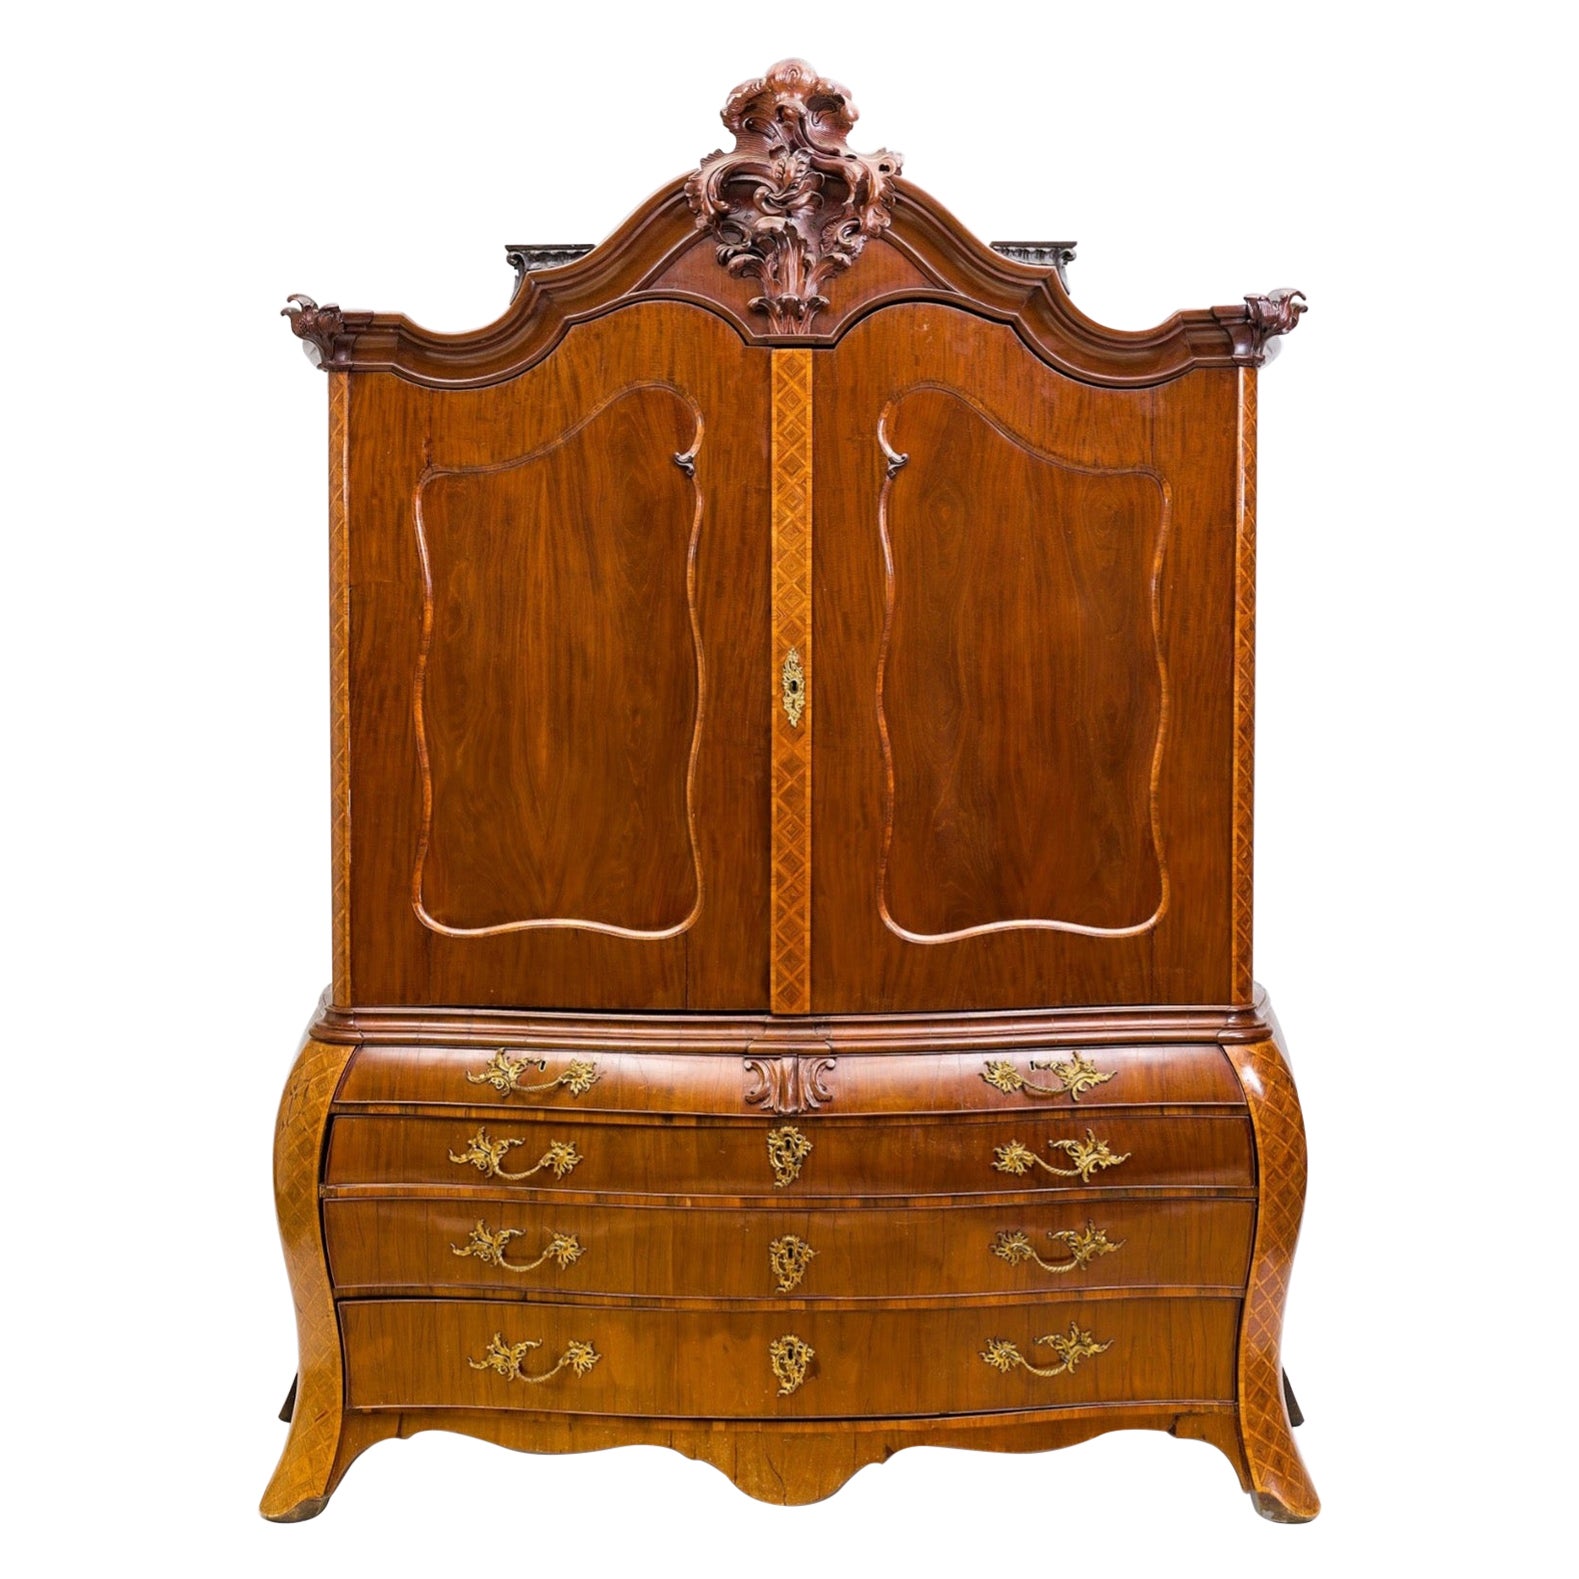 A Superb Dutch 18th-century Rococo cabinet atributted to Matthijs Franses For Sale